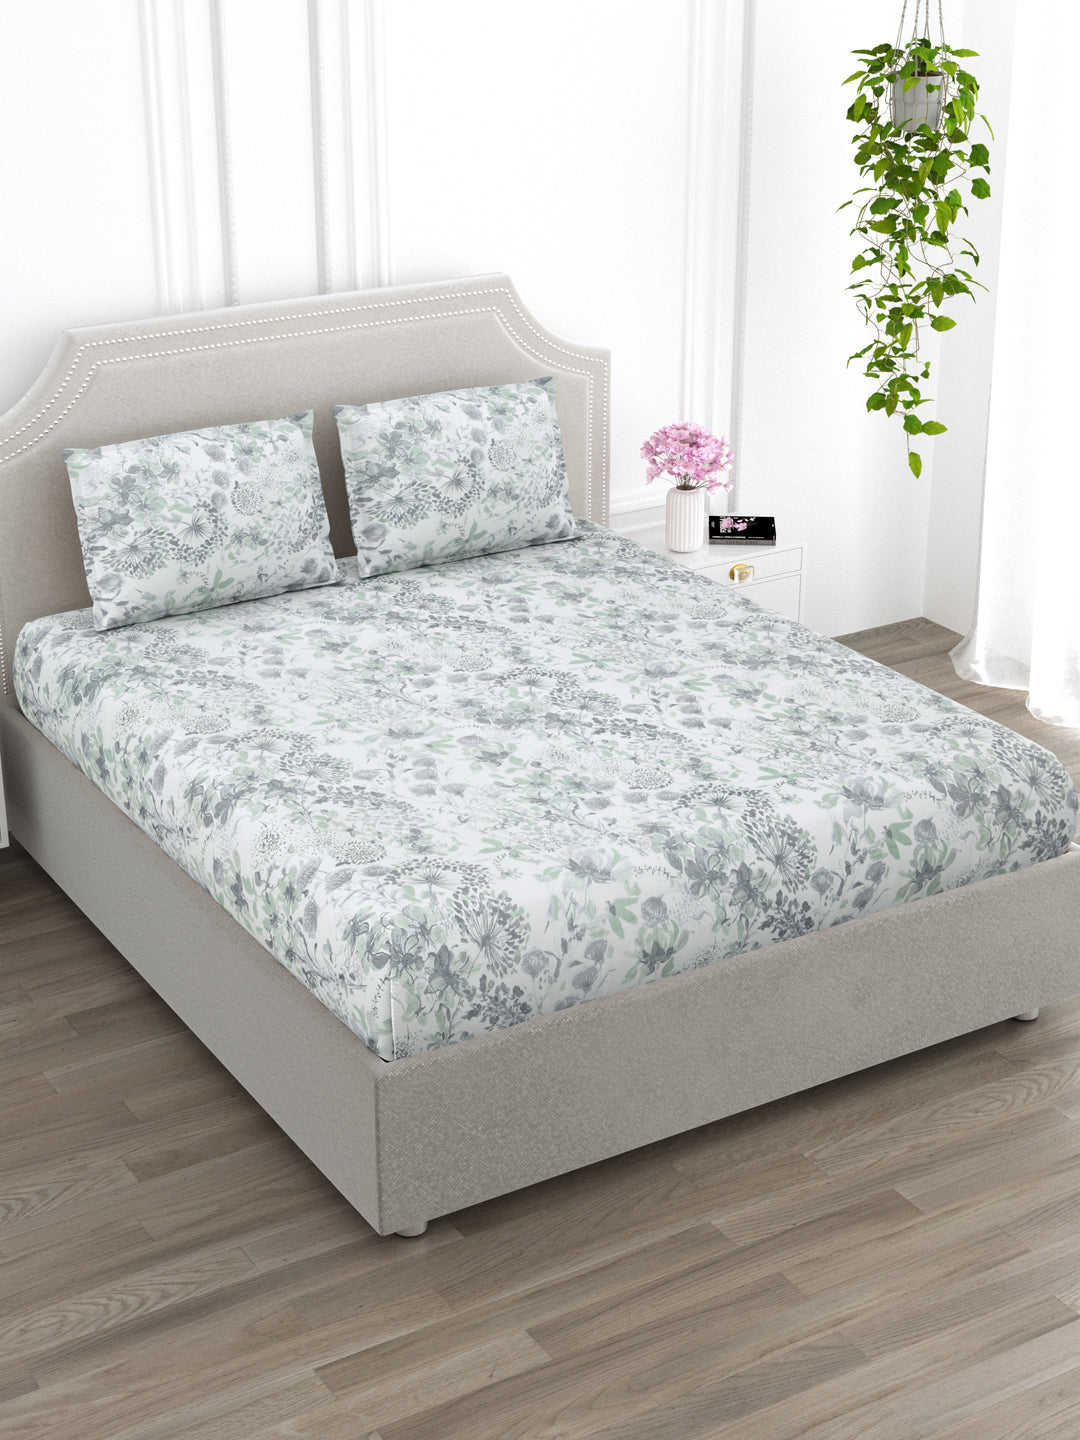 Green & Grey Floral King Size Bed Cotton Linen